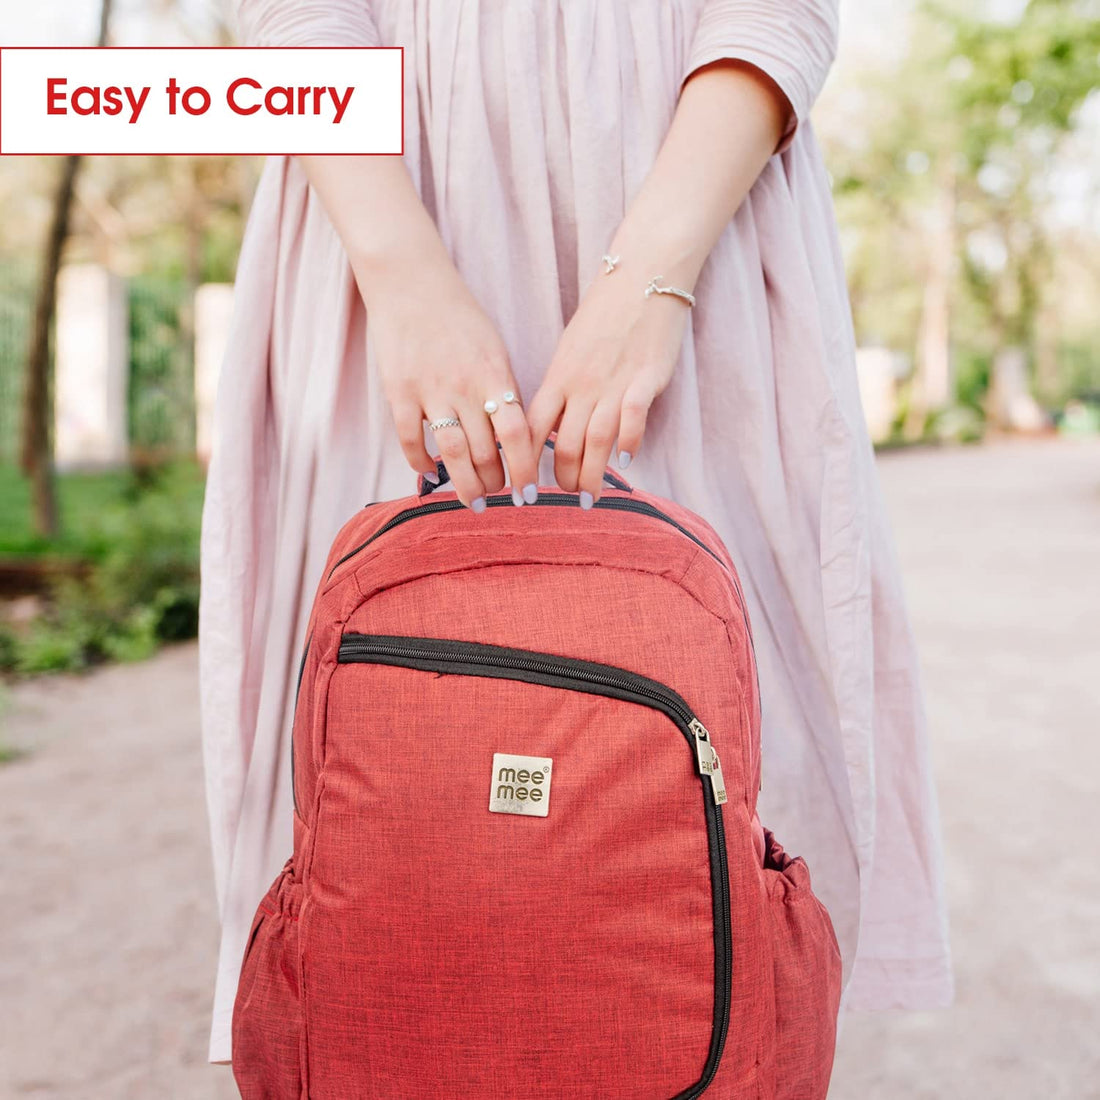 Mee Mee - Easy To Carry Backpack